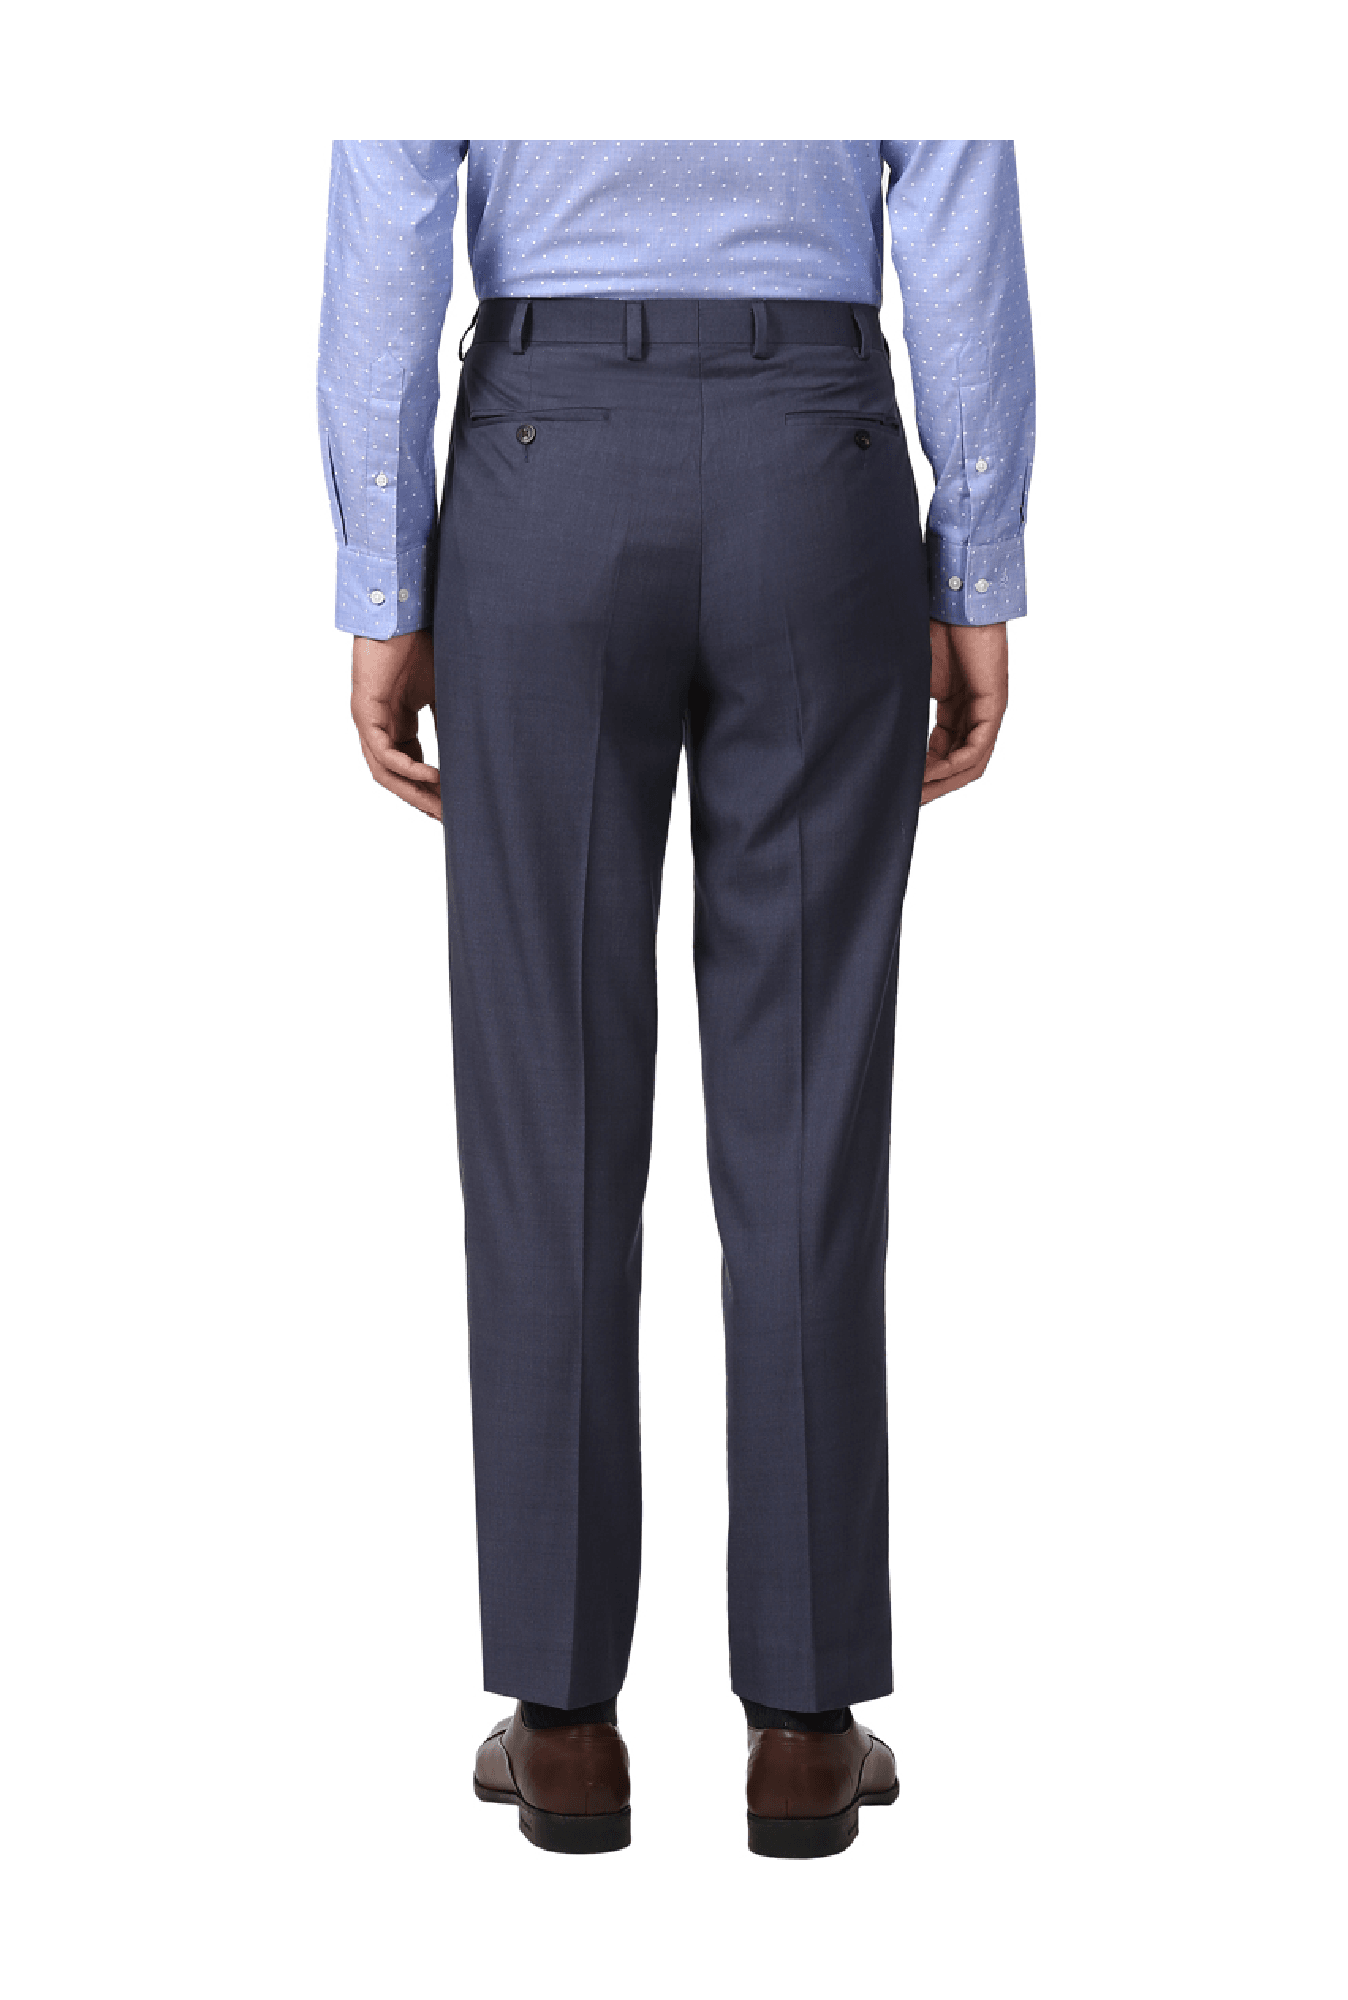 Park Avenue Trouser - Get Best Price from Manufacturers & Suppliers in India